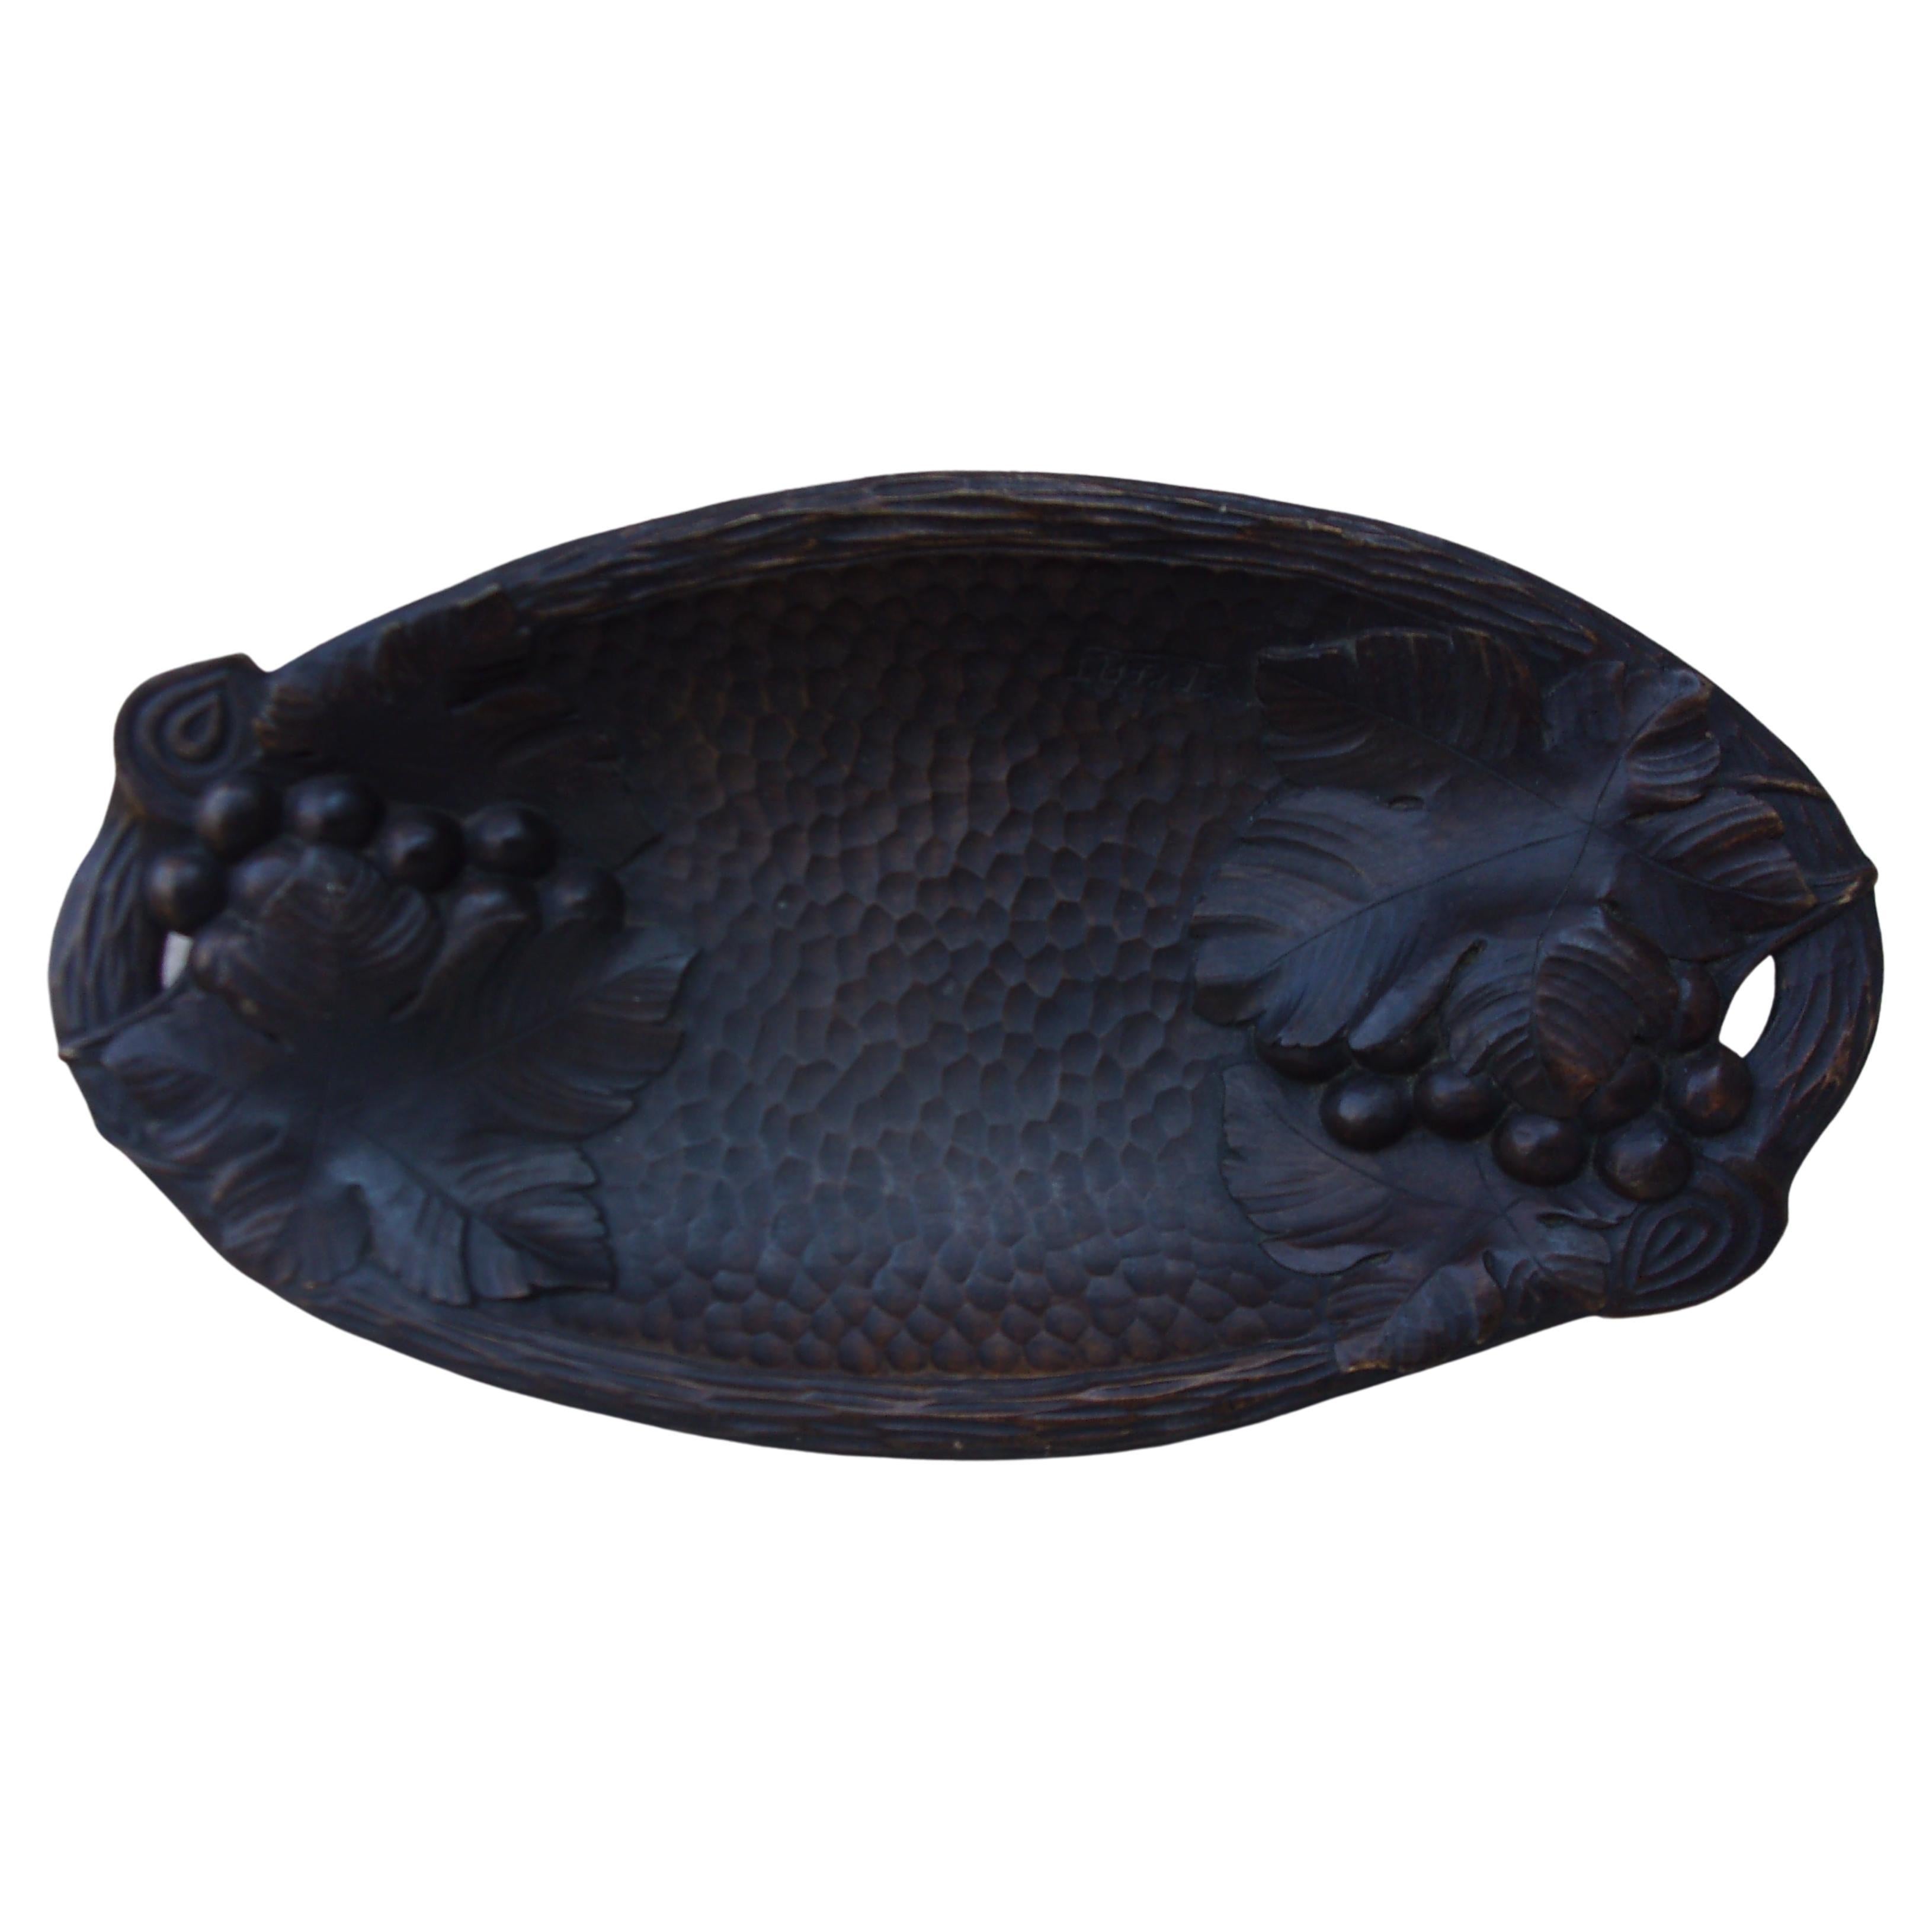 French carved wood bread or for fruits platter with grapes and vine leaves, circa 1900.